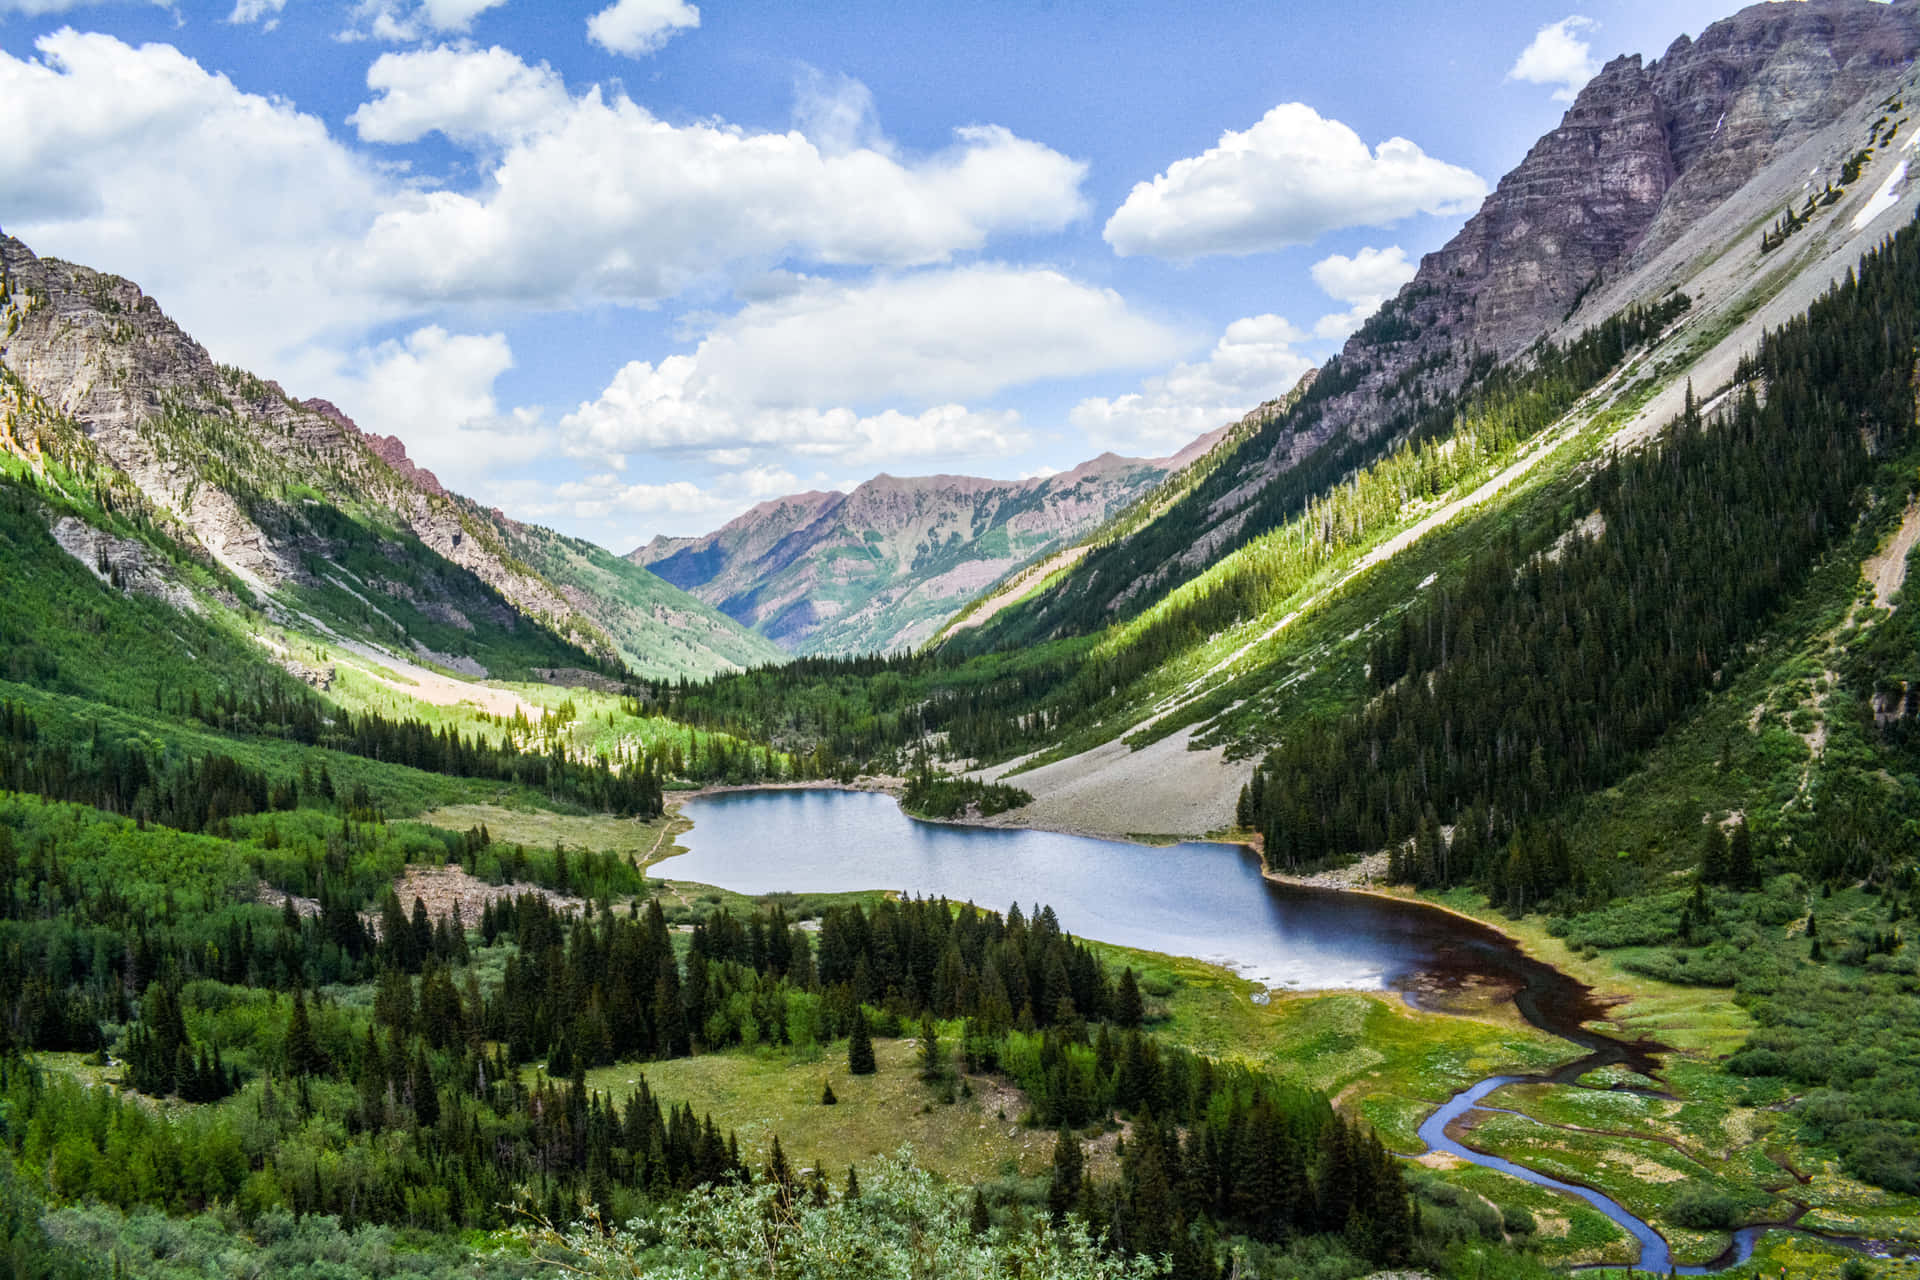 Enjoy the beauty of Aspen, Colorado with breathtaking views of the Rocky Mountains.